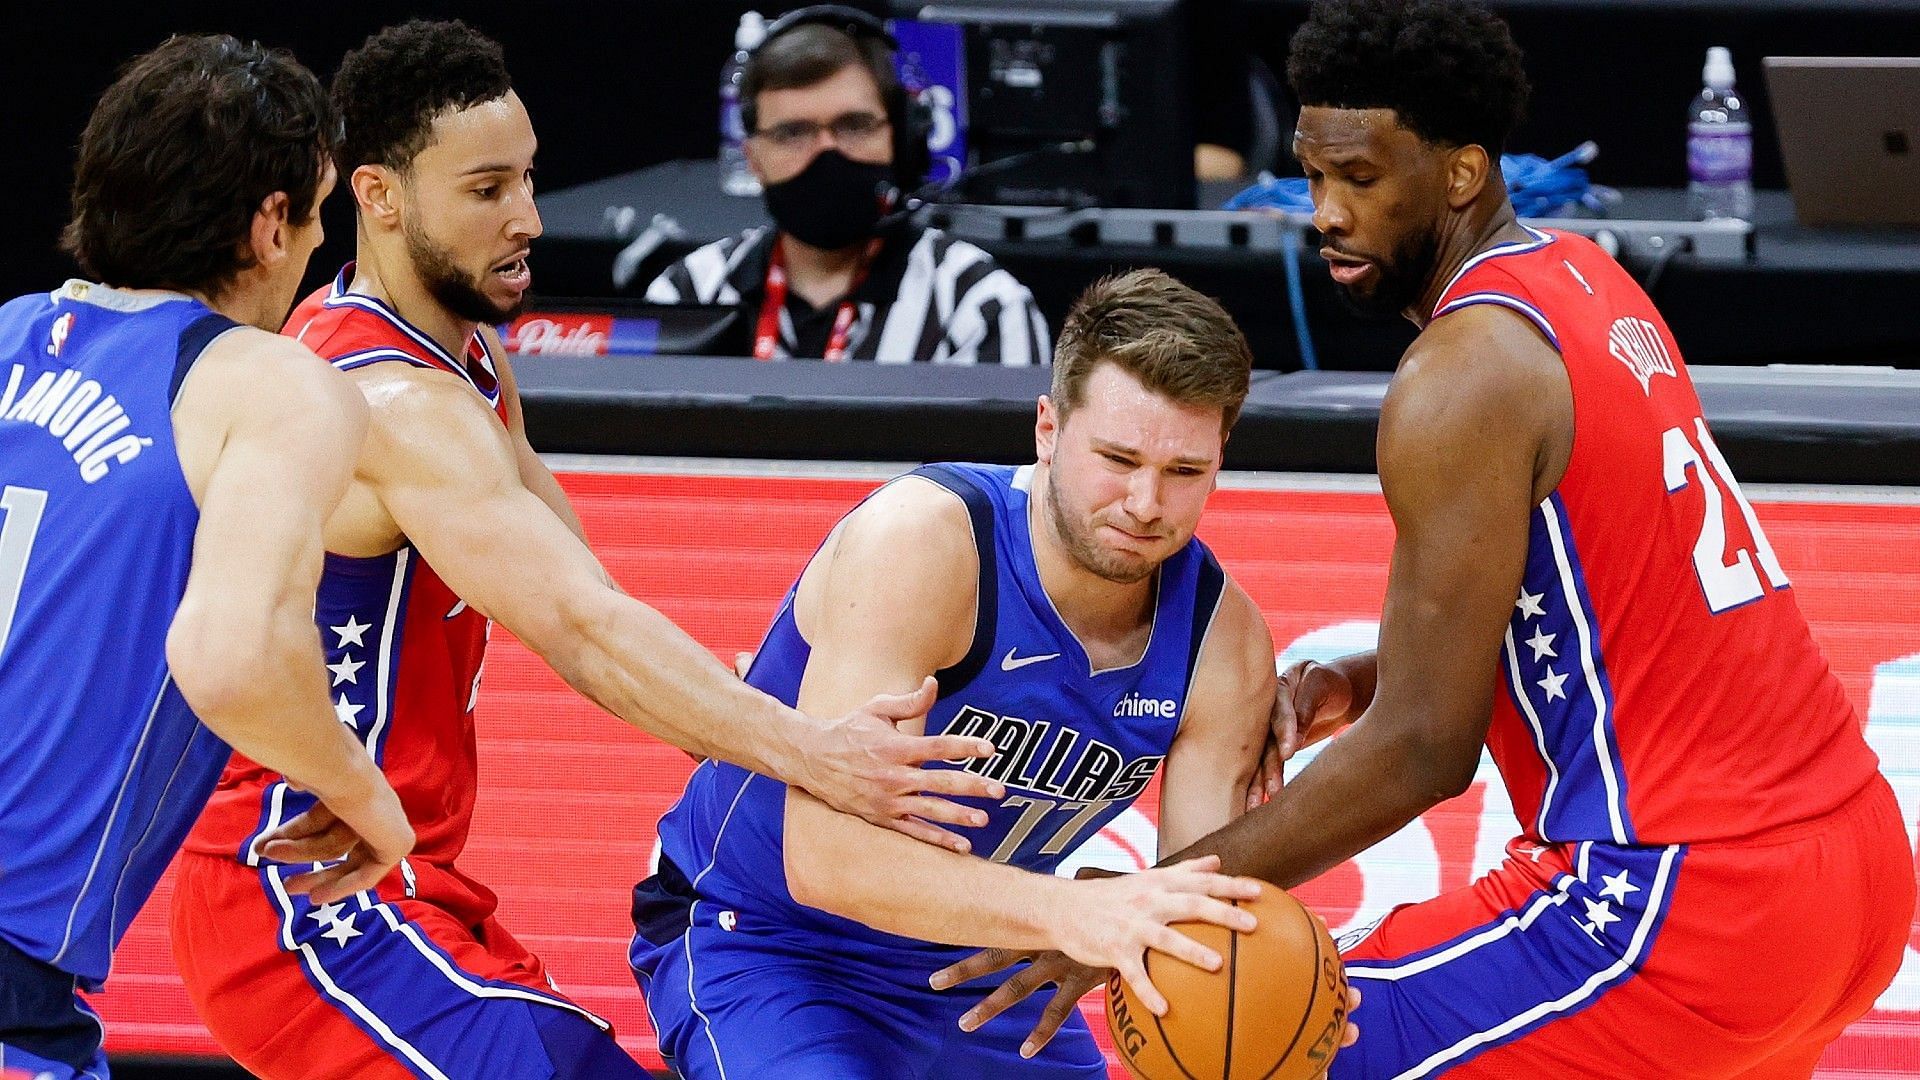 Luka Doncic of the Dallas Mavericks against Joel Embiid and Ben Simmons of the Philadelphia 76ers